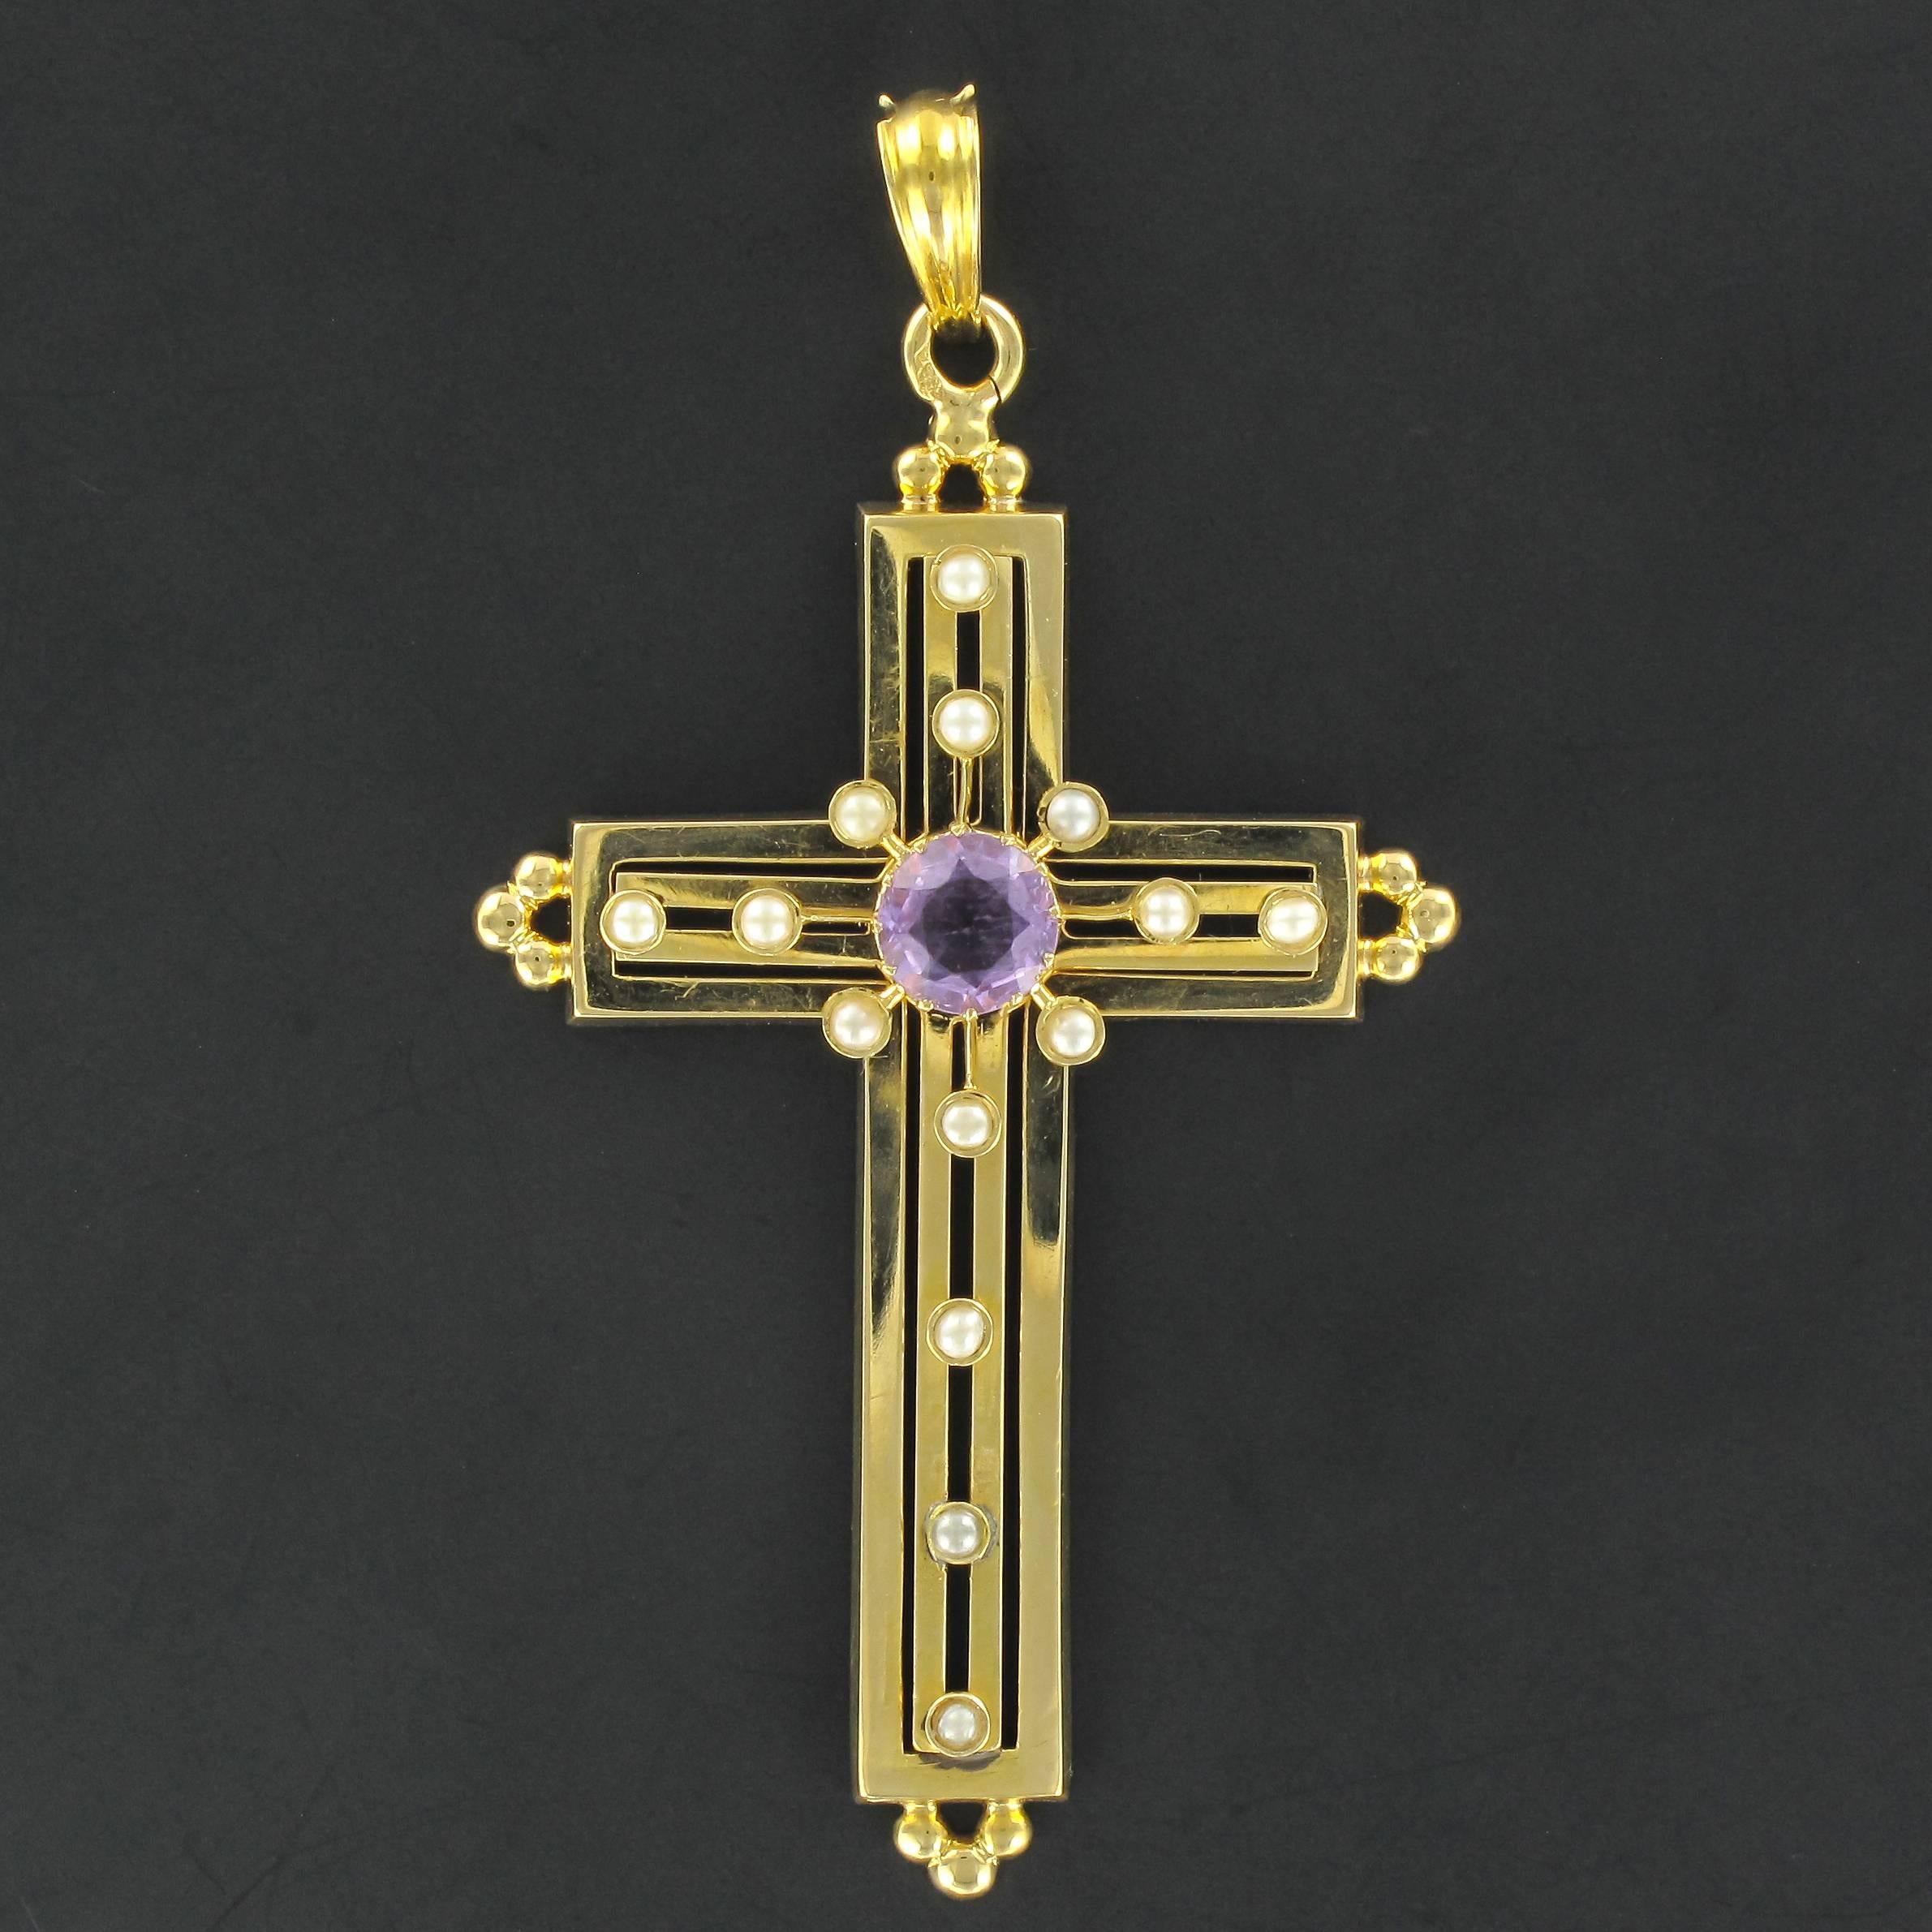 Cross in 18 carats yellow gold, eagle head hallmark.

Cross in gold openwork composed of an amethyst in its center and 14 natural pearls.

Overall length: 7.2 cm, width to the widest: 4 cm, thickness to the widest: 6 mm.
Total weight : 7.4 g